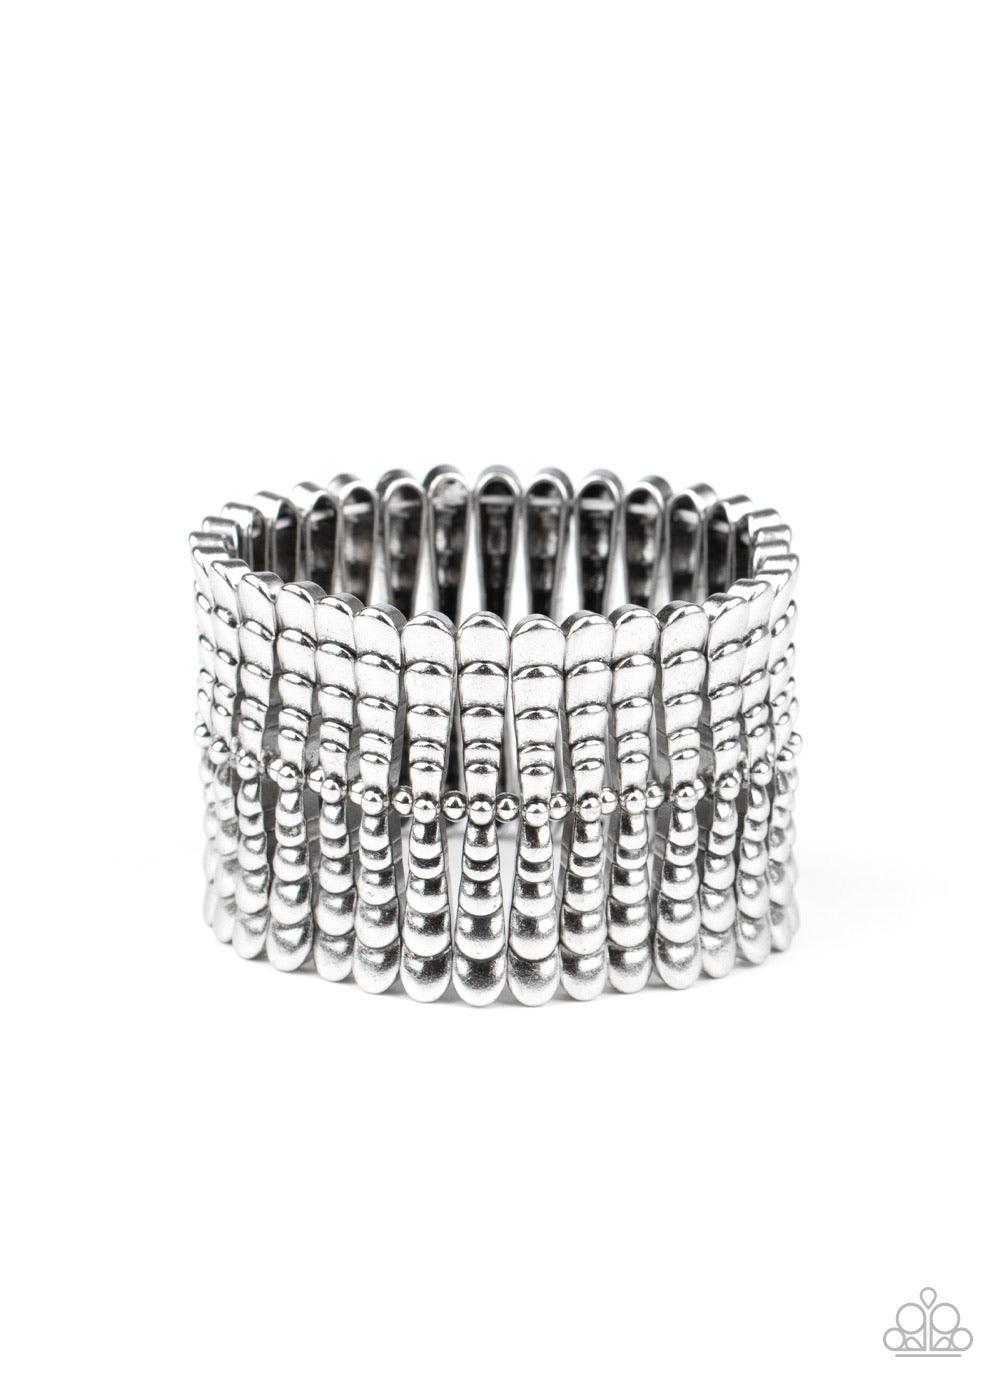 Paparazzi Accessories Level Field - Silver Infused with dainty silver beads, rippling silver bars are threaded along stretchy bands around the wrist, creating a rustic centerpiece. Sold as one individual bracelet. Jewelry